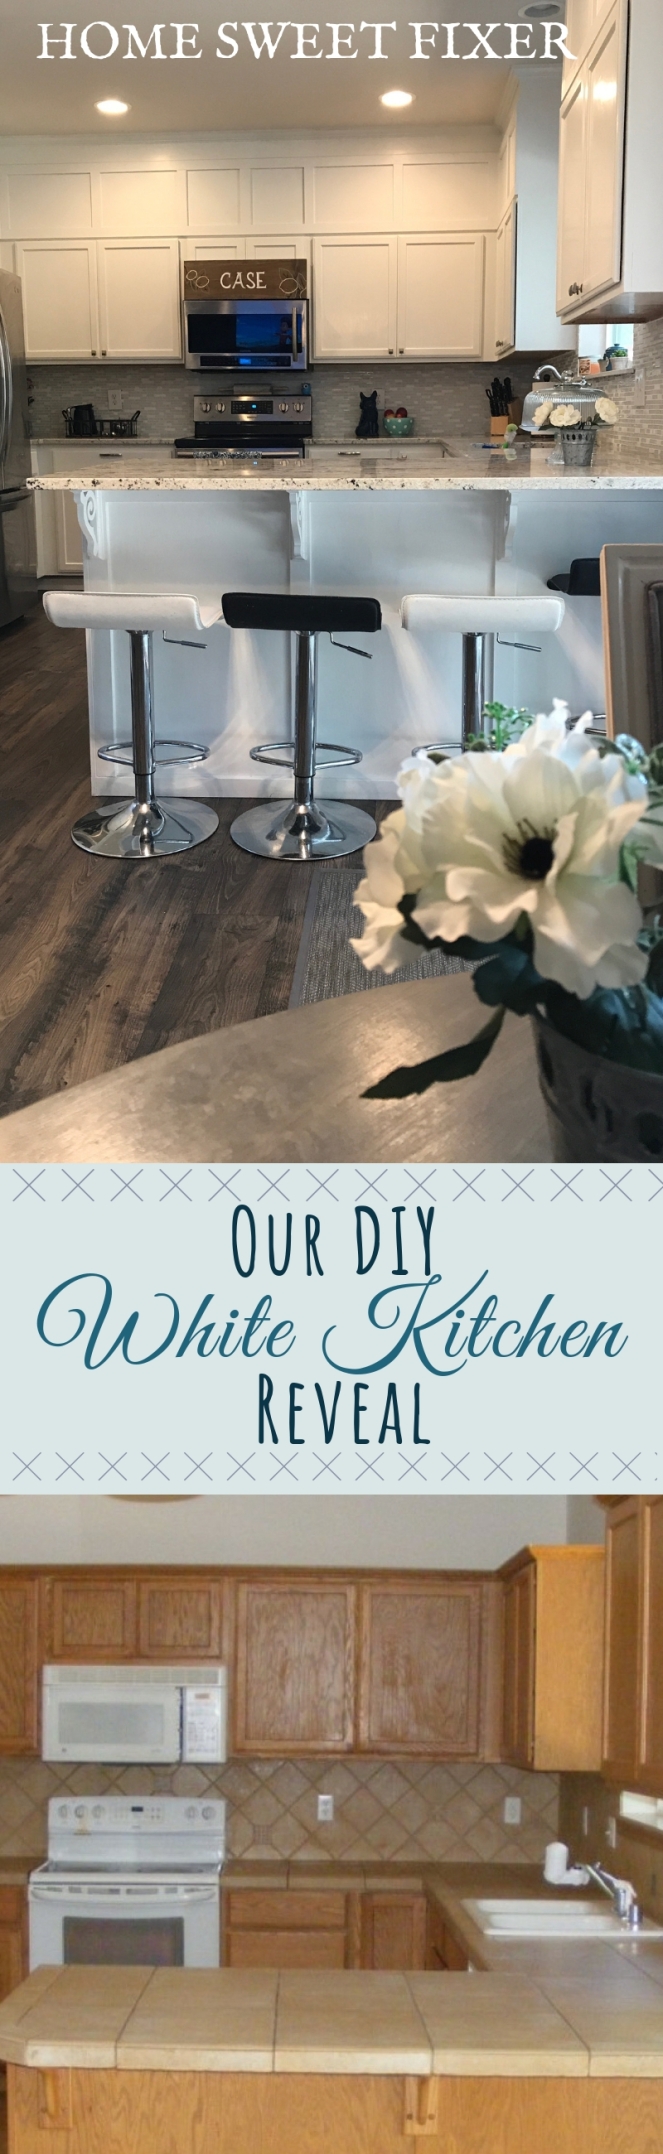 Our Diy White Kitchen Reveal Before & After-Home Sweet Fixer.jpg